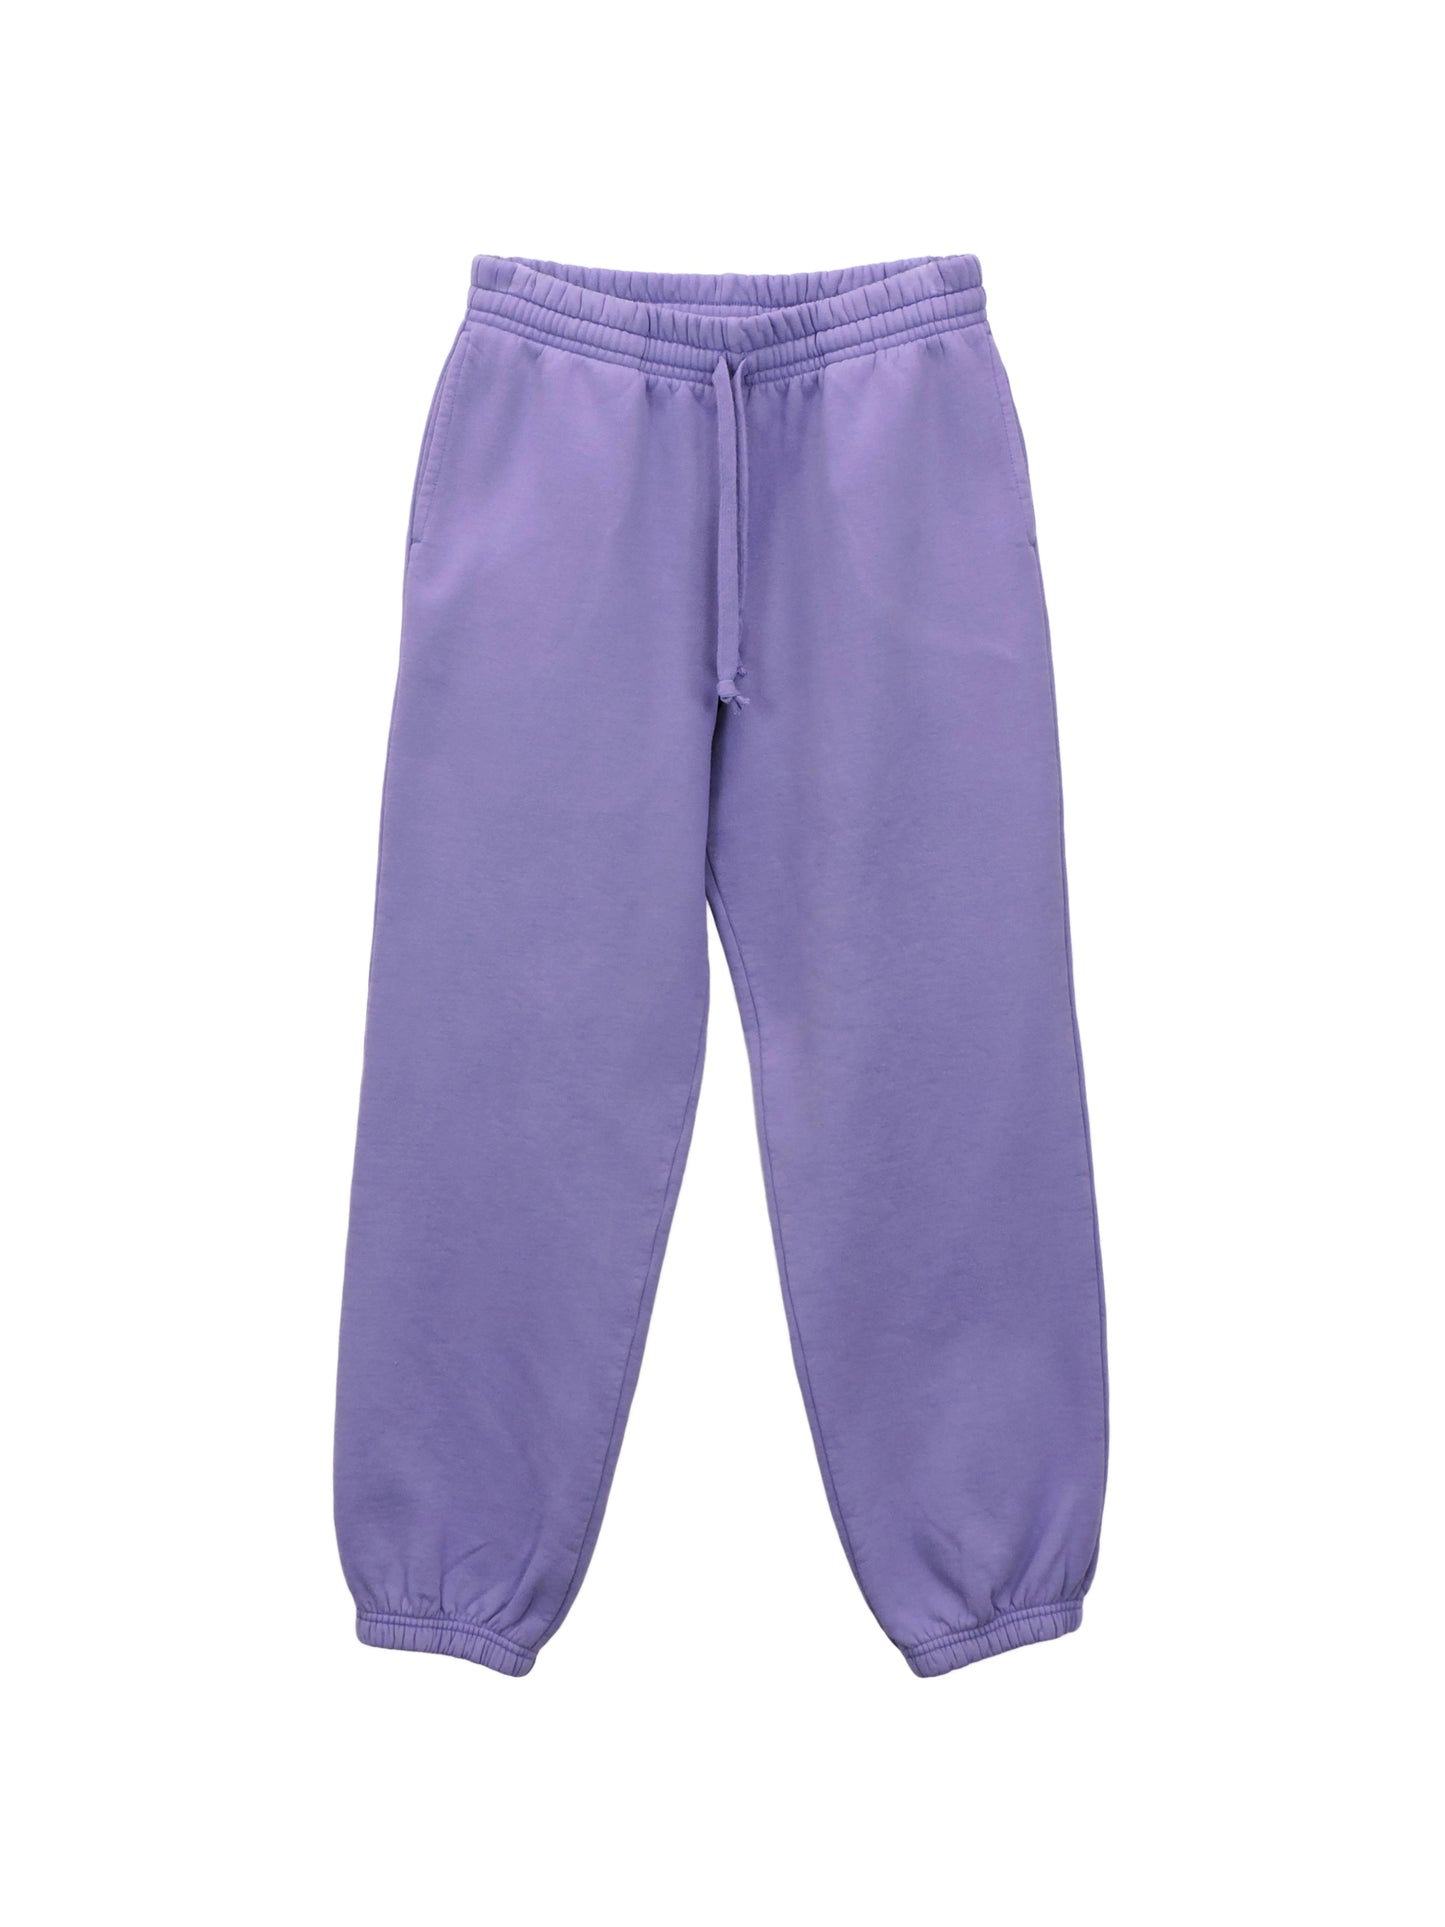 Heavy Purple Fleece Sweatpants with Elastic Ankle Cuffs, Two Side Pockets, and Blended Drawstrings